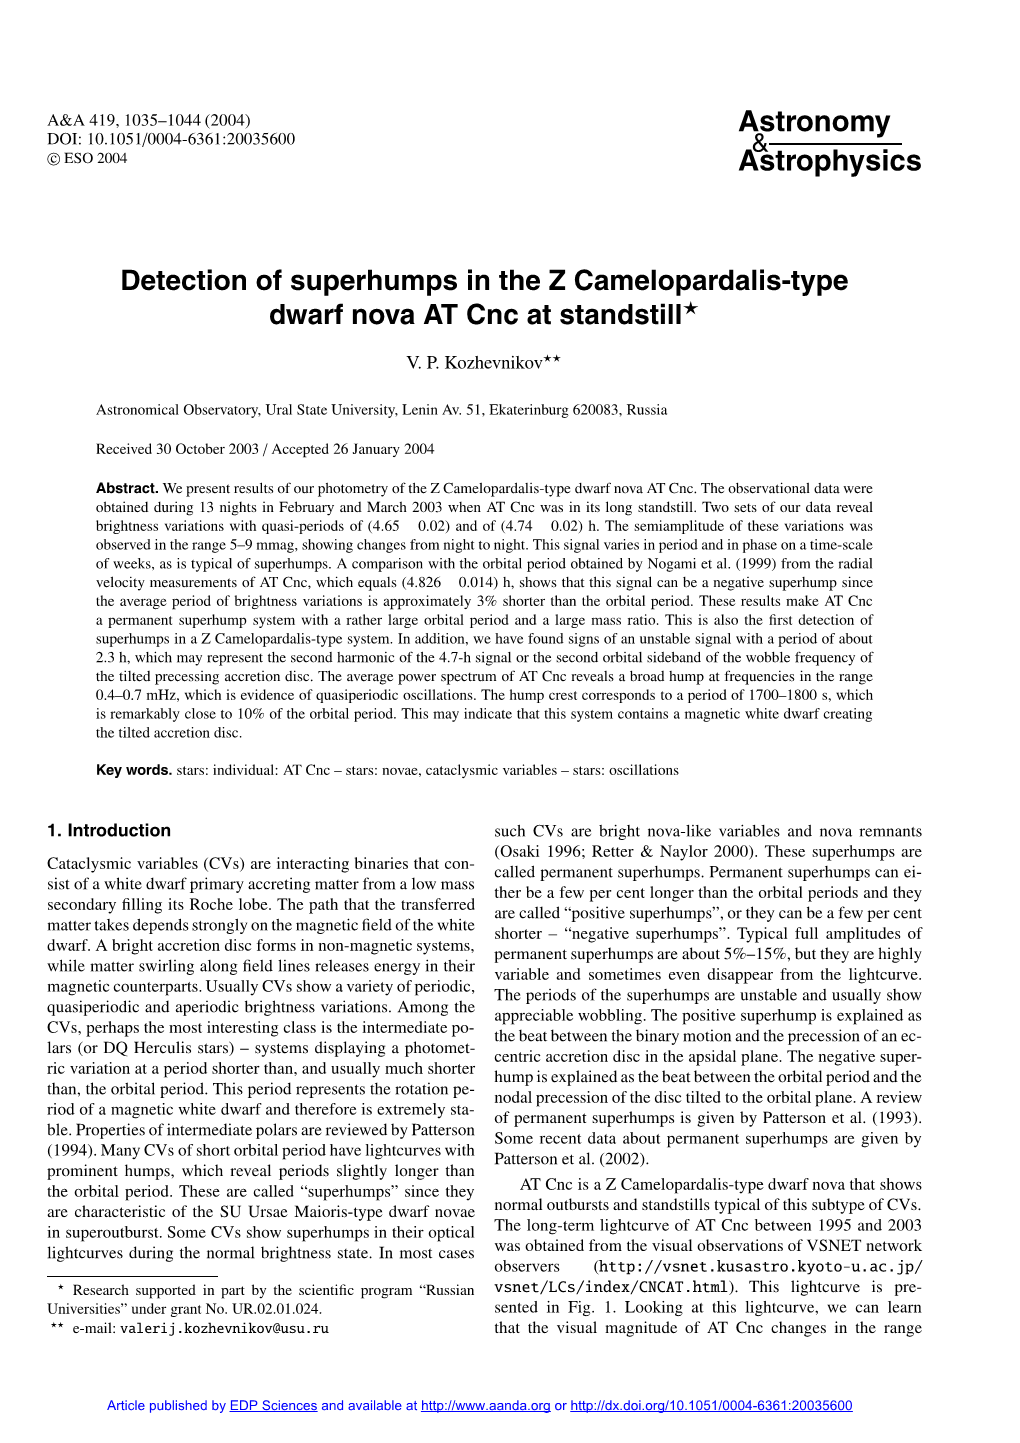 Detection of Superhumps in the Z Camelopardalis-Type Dwarf Nova at Cnc at Standstill